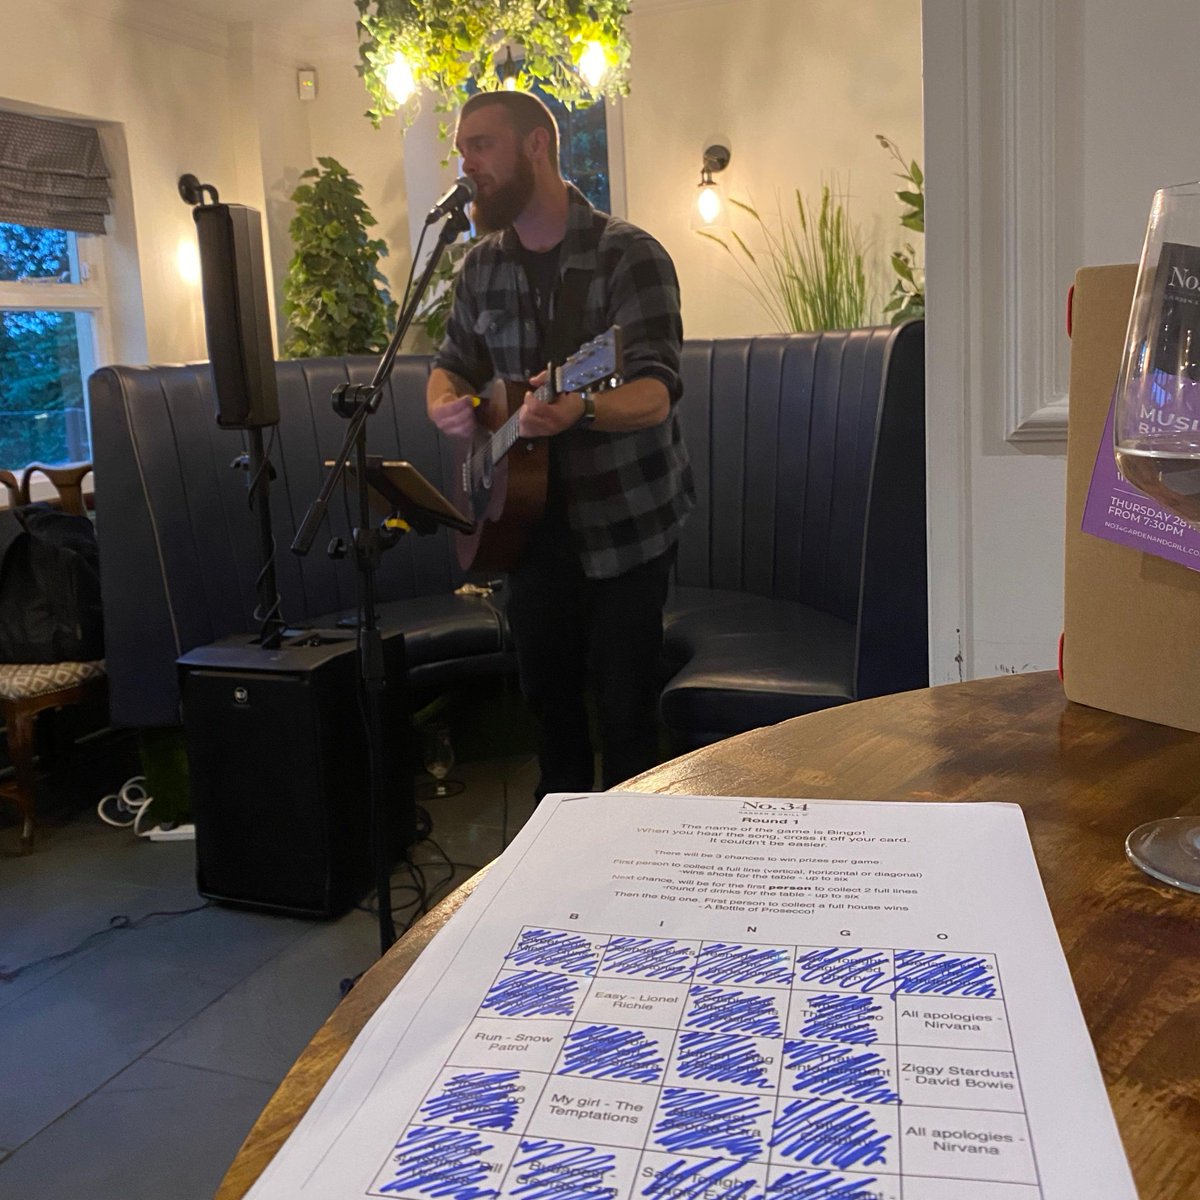 MUSICAL BINGO 🌱 Have you booked your seats for #MusicalBingo with Billy Driscoll yet? 👀 Don't miss out, and kick off your #AugustBankHoliday weekend with a bang! ➡️ no34gardenandgrill.co.uk/book @buyin2warwick #BuyIn2Warwick #Music #Warwickshire